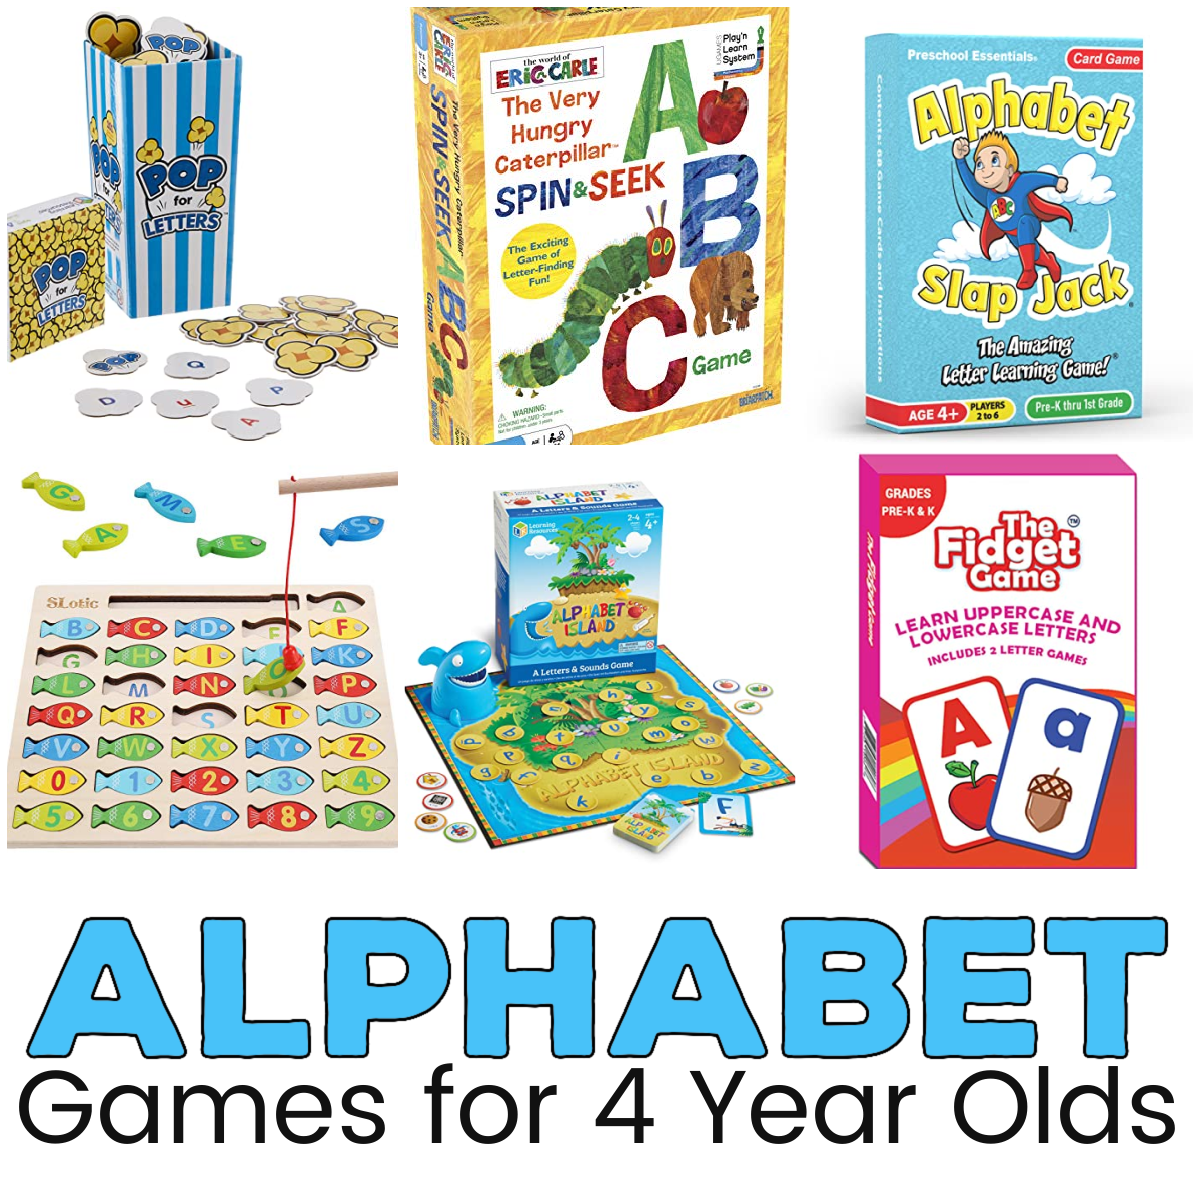 Alphabet-Games-for-4-Year-Olds-1 Alphabet Games for 4 Year Olds